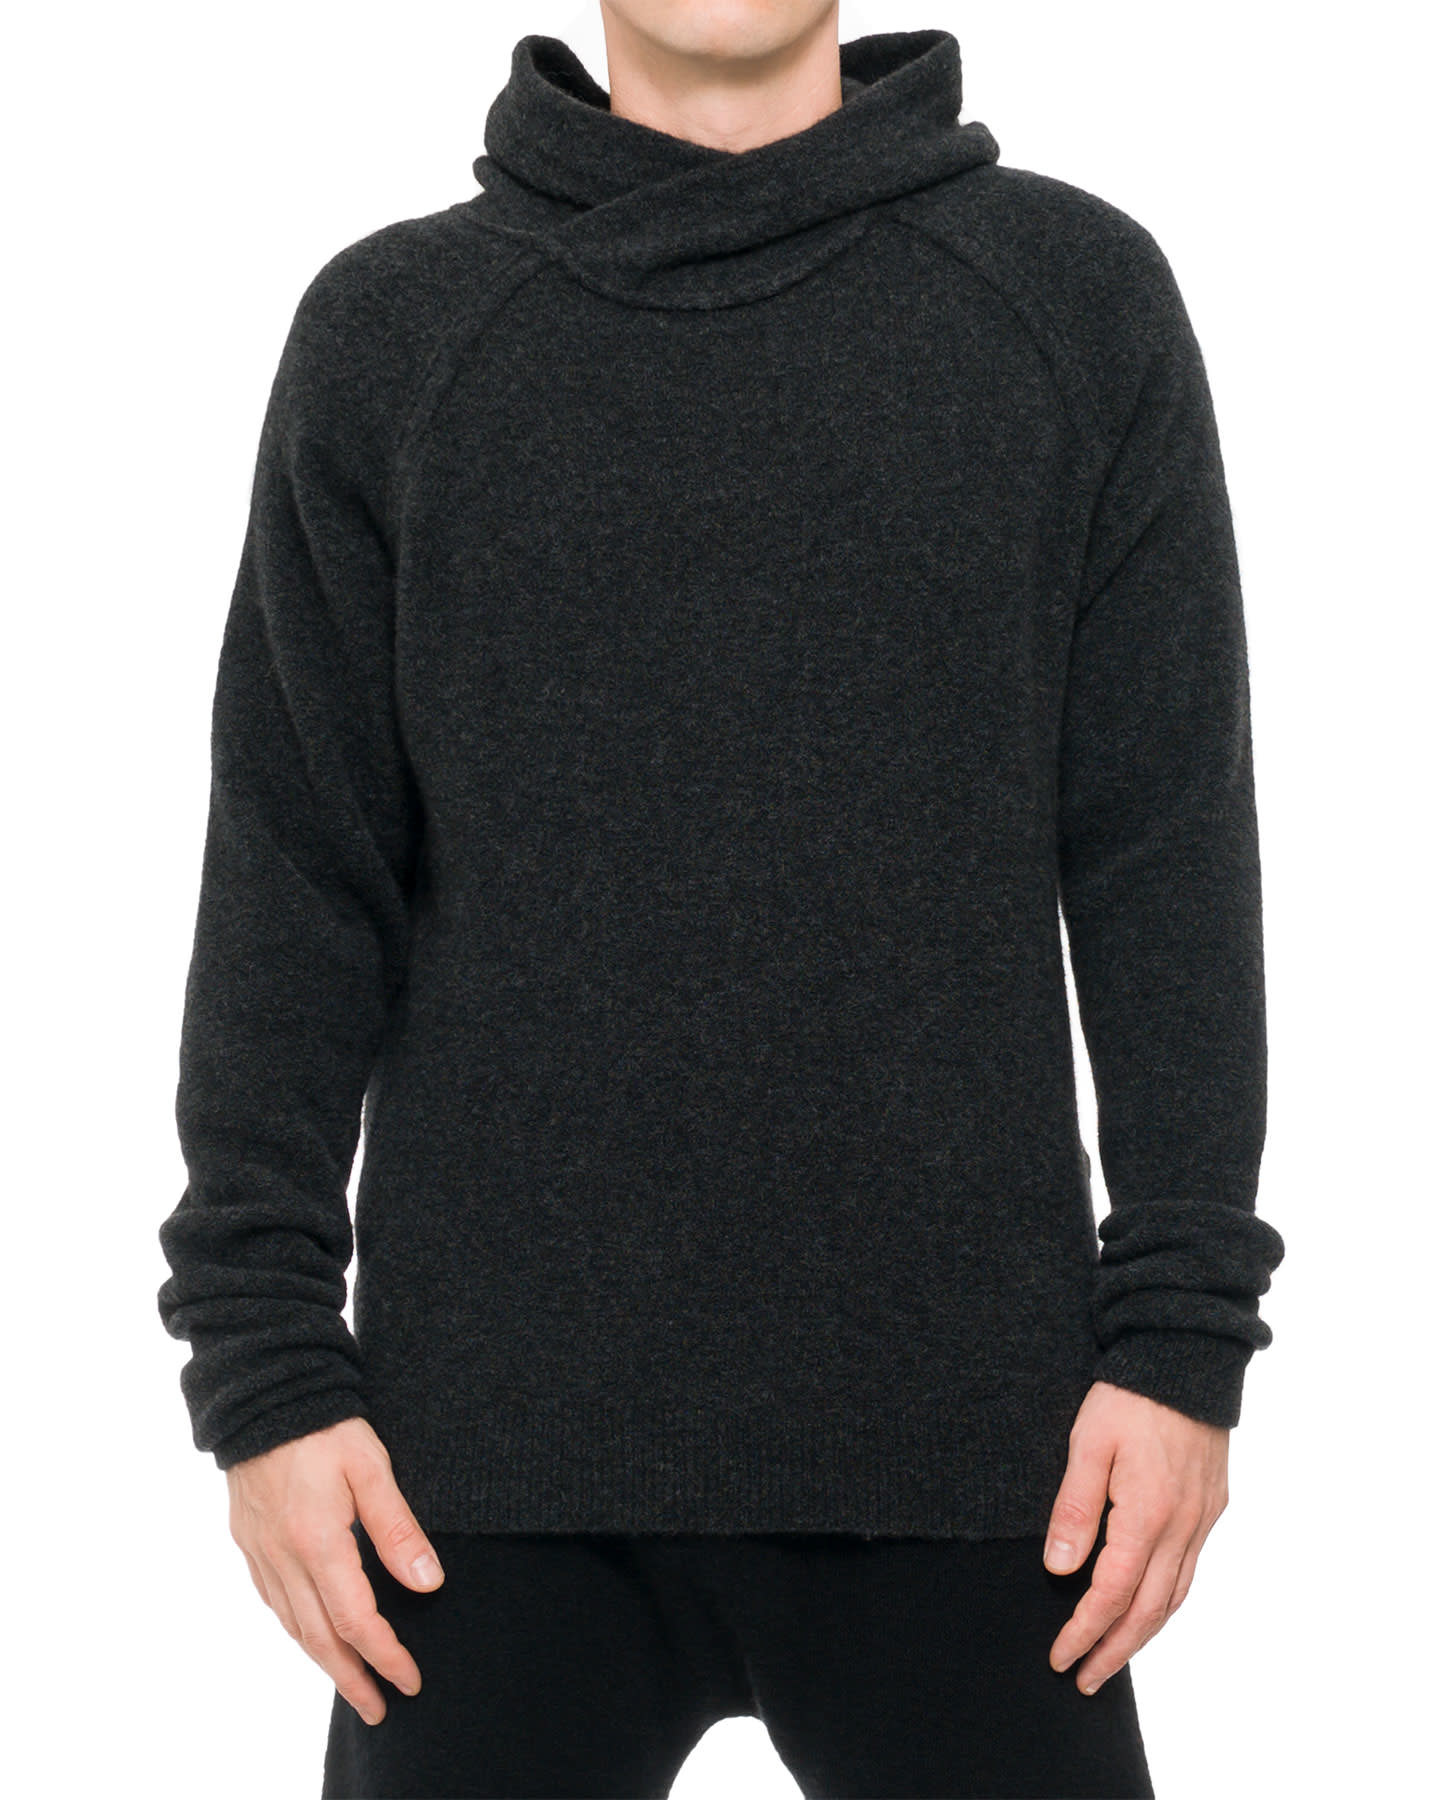 MEN'S KNIT YAK PULLOVER HOODY 19 by ISABEL BENENATO - Shop Untitled NYC